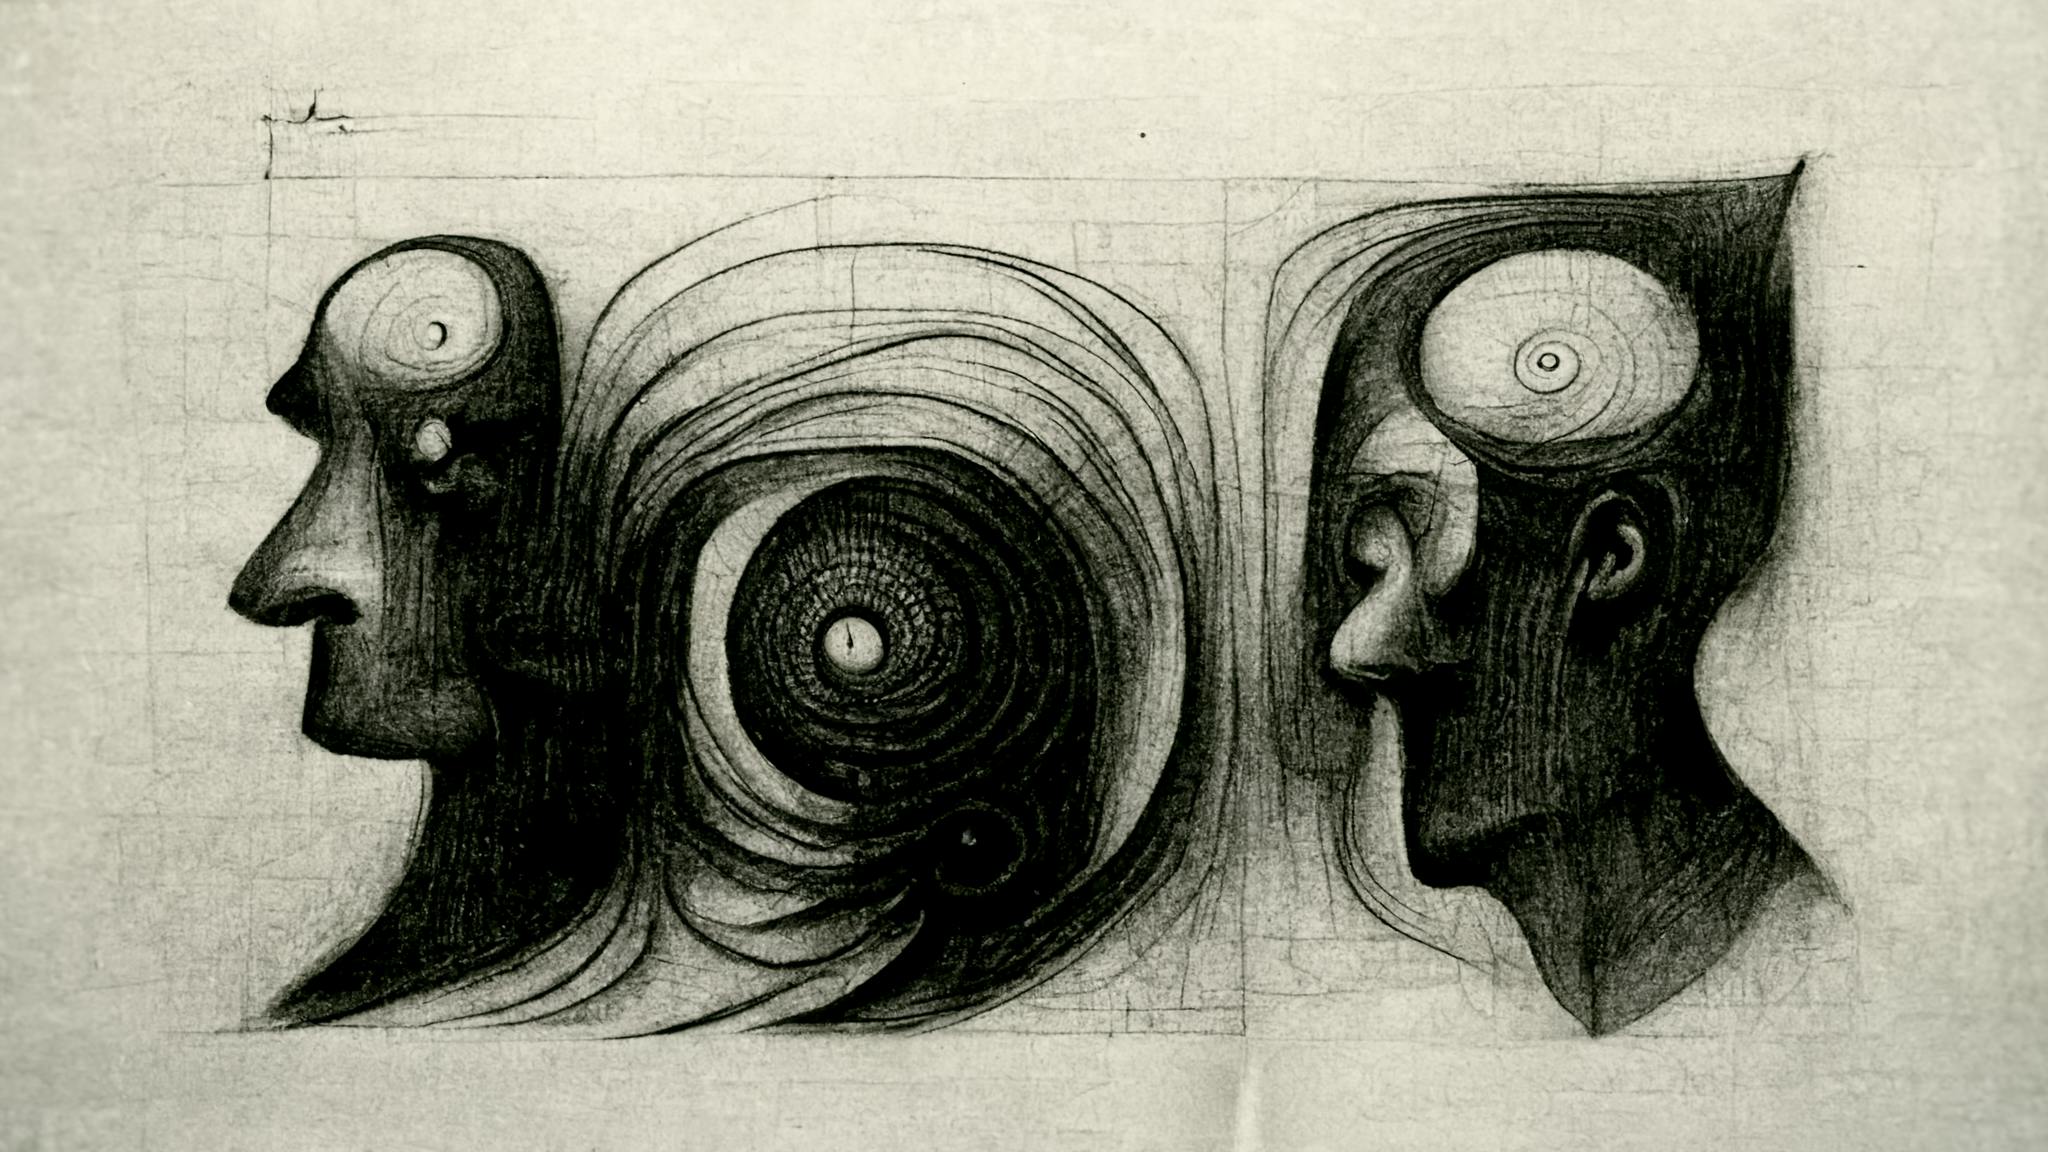 a drawing of the mind in different directions, mental confusion or bewilderment 